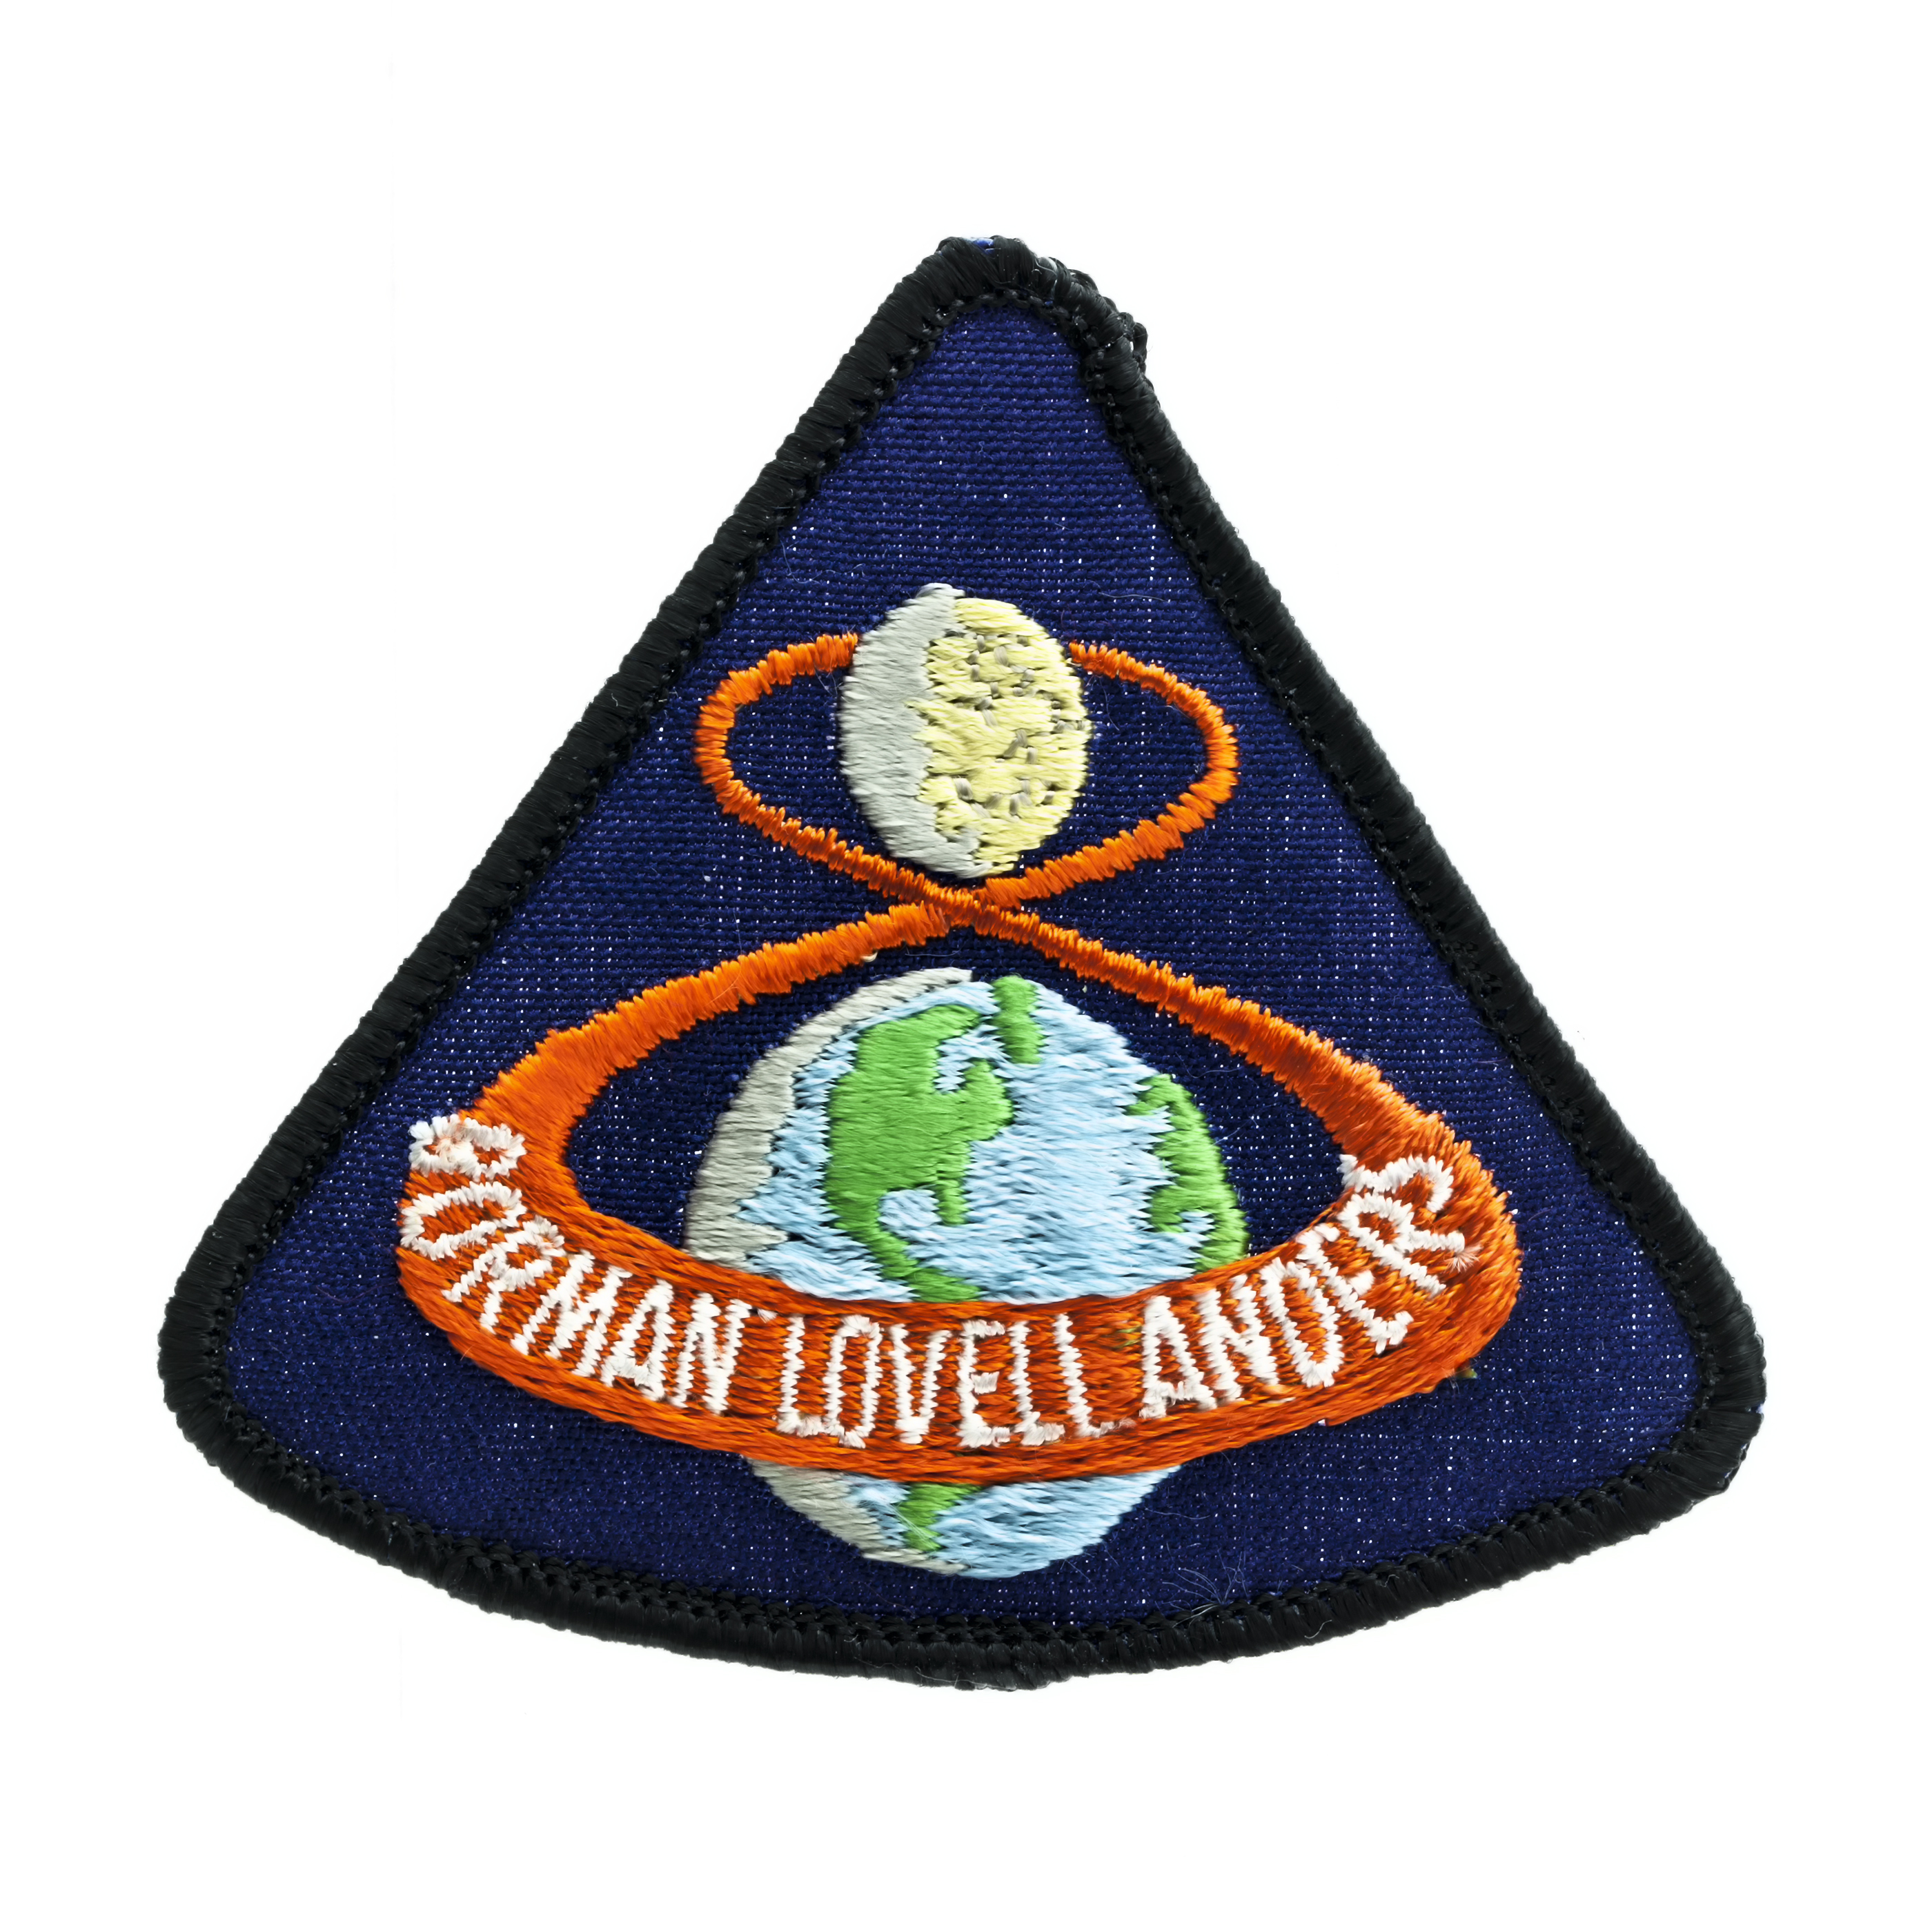 Photo of Apollo 8 mission patch